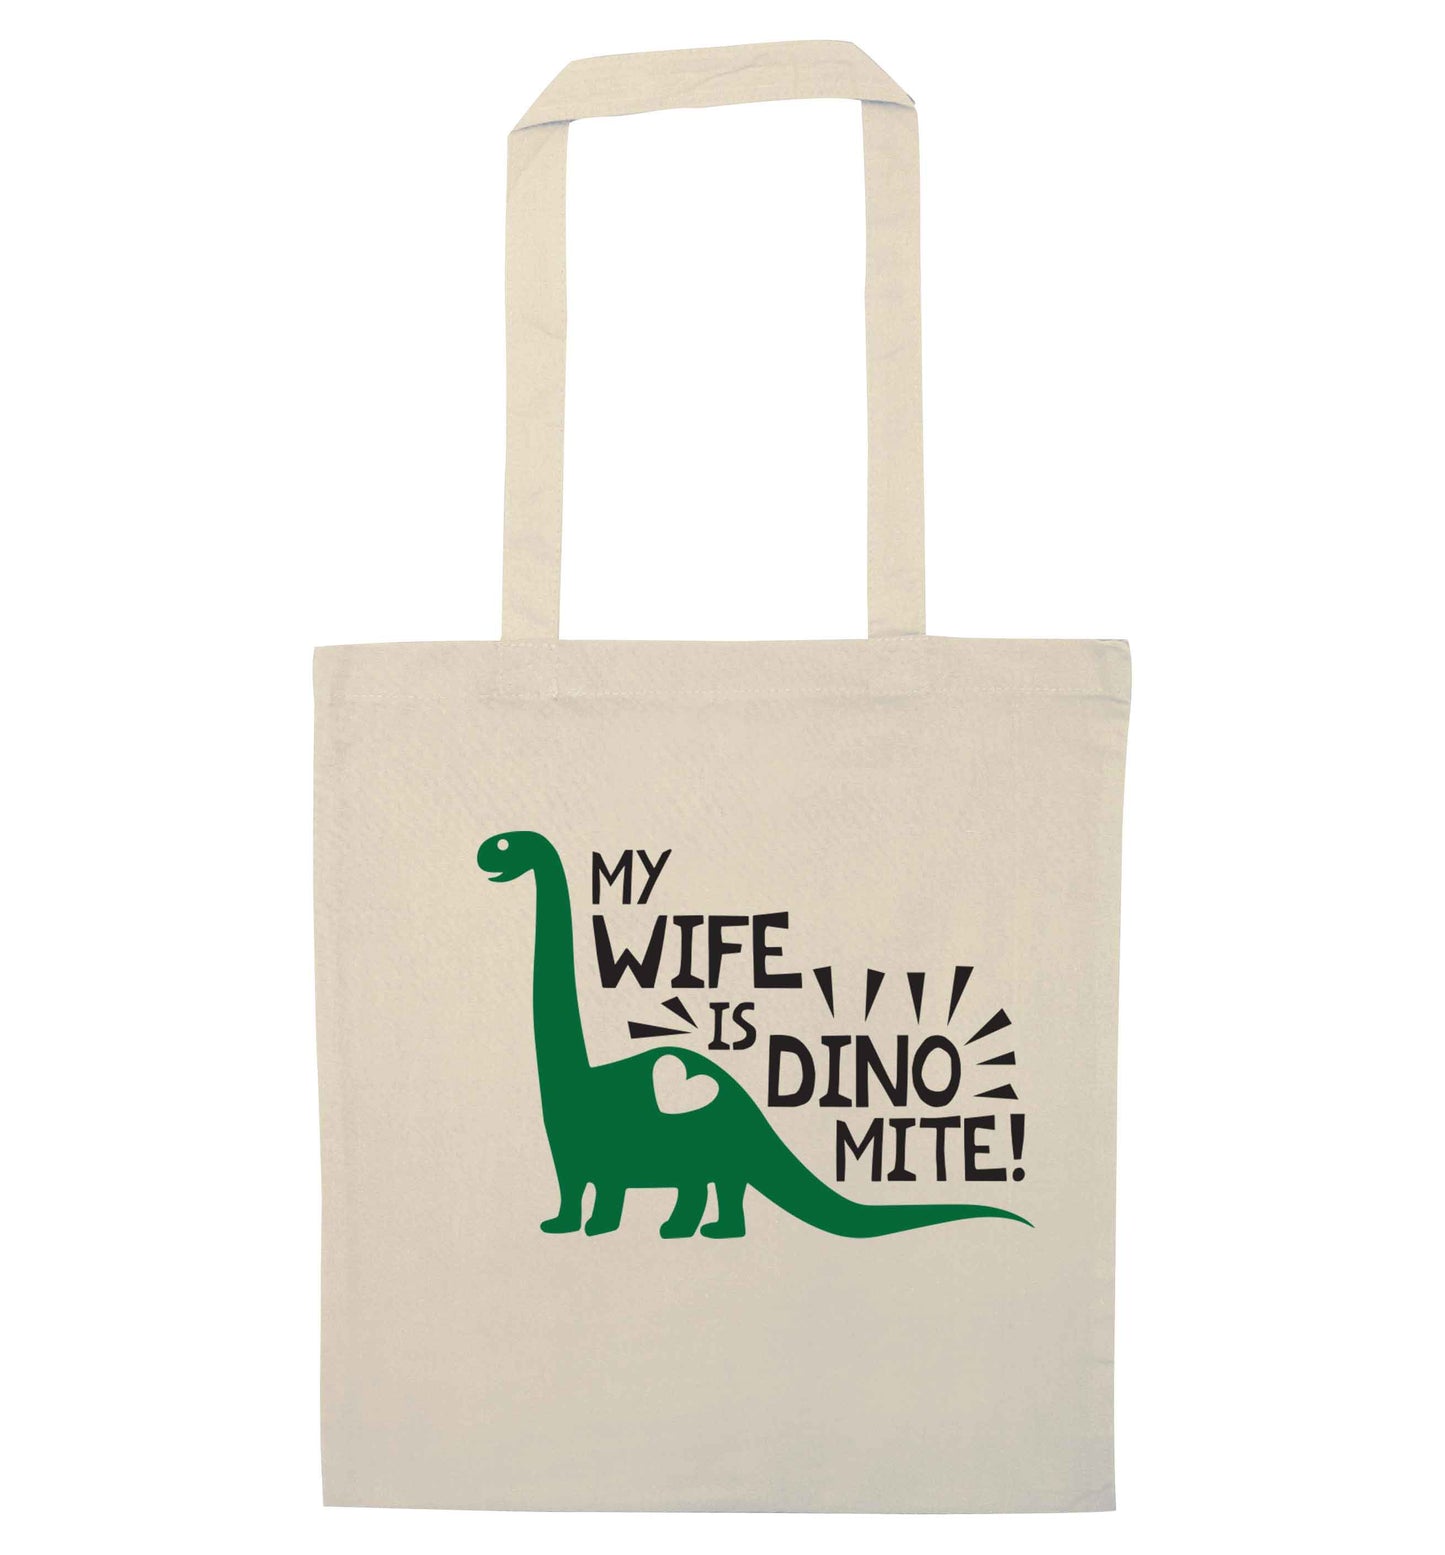 My wife is dinomite! natural tote bag